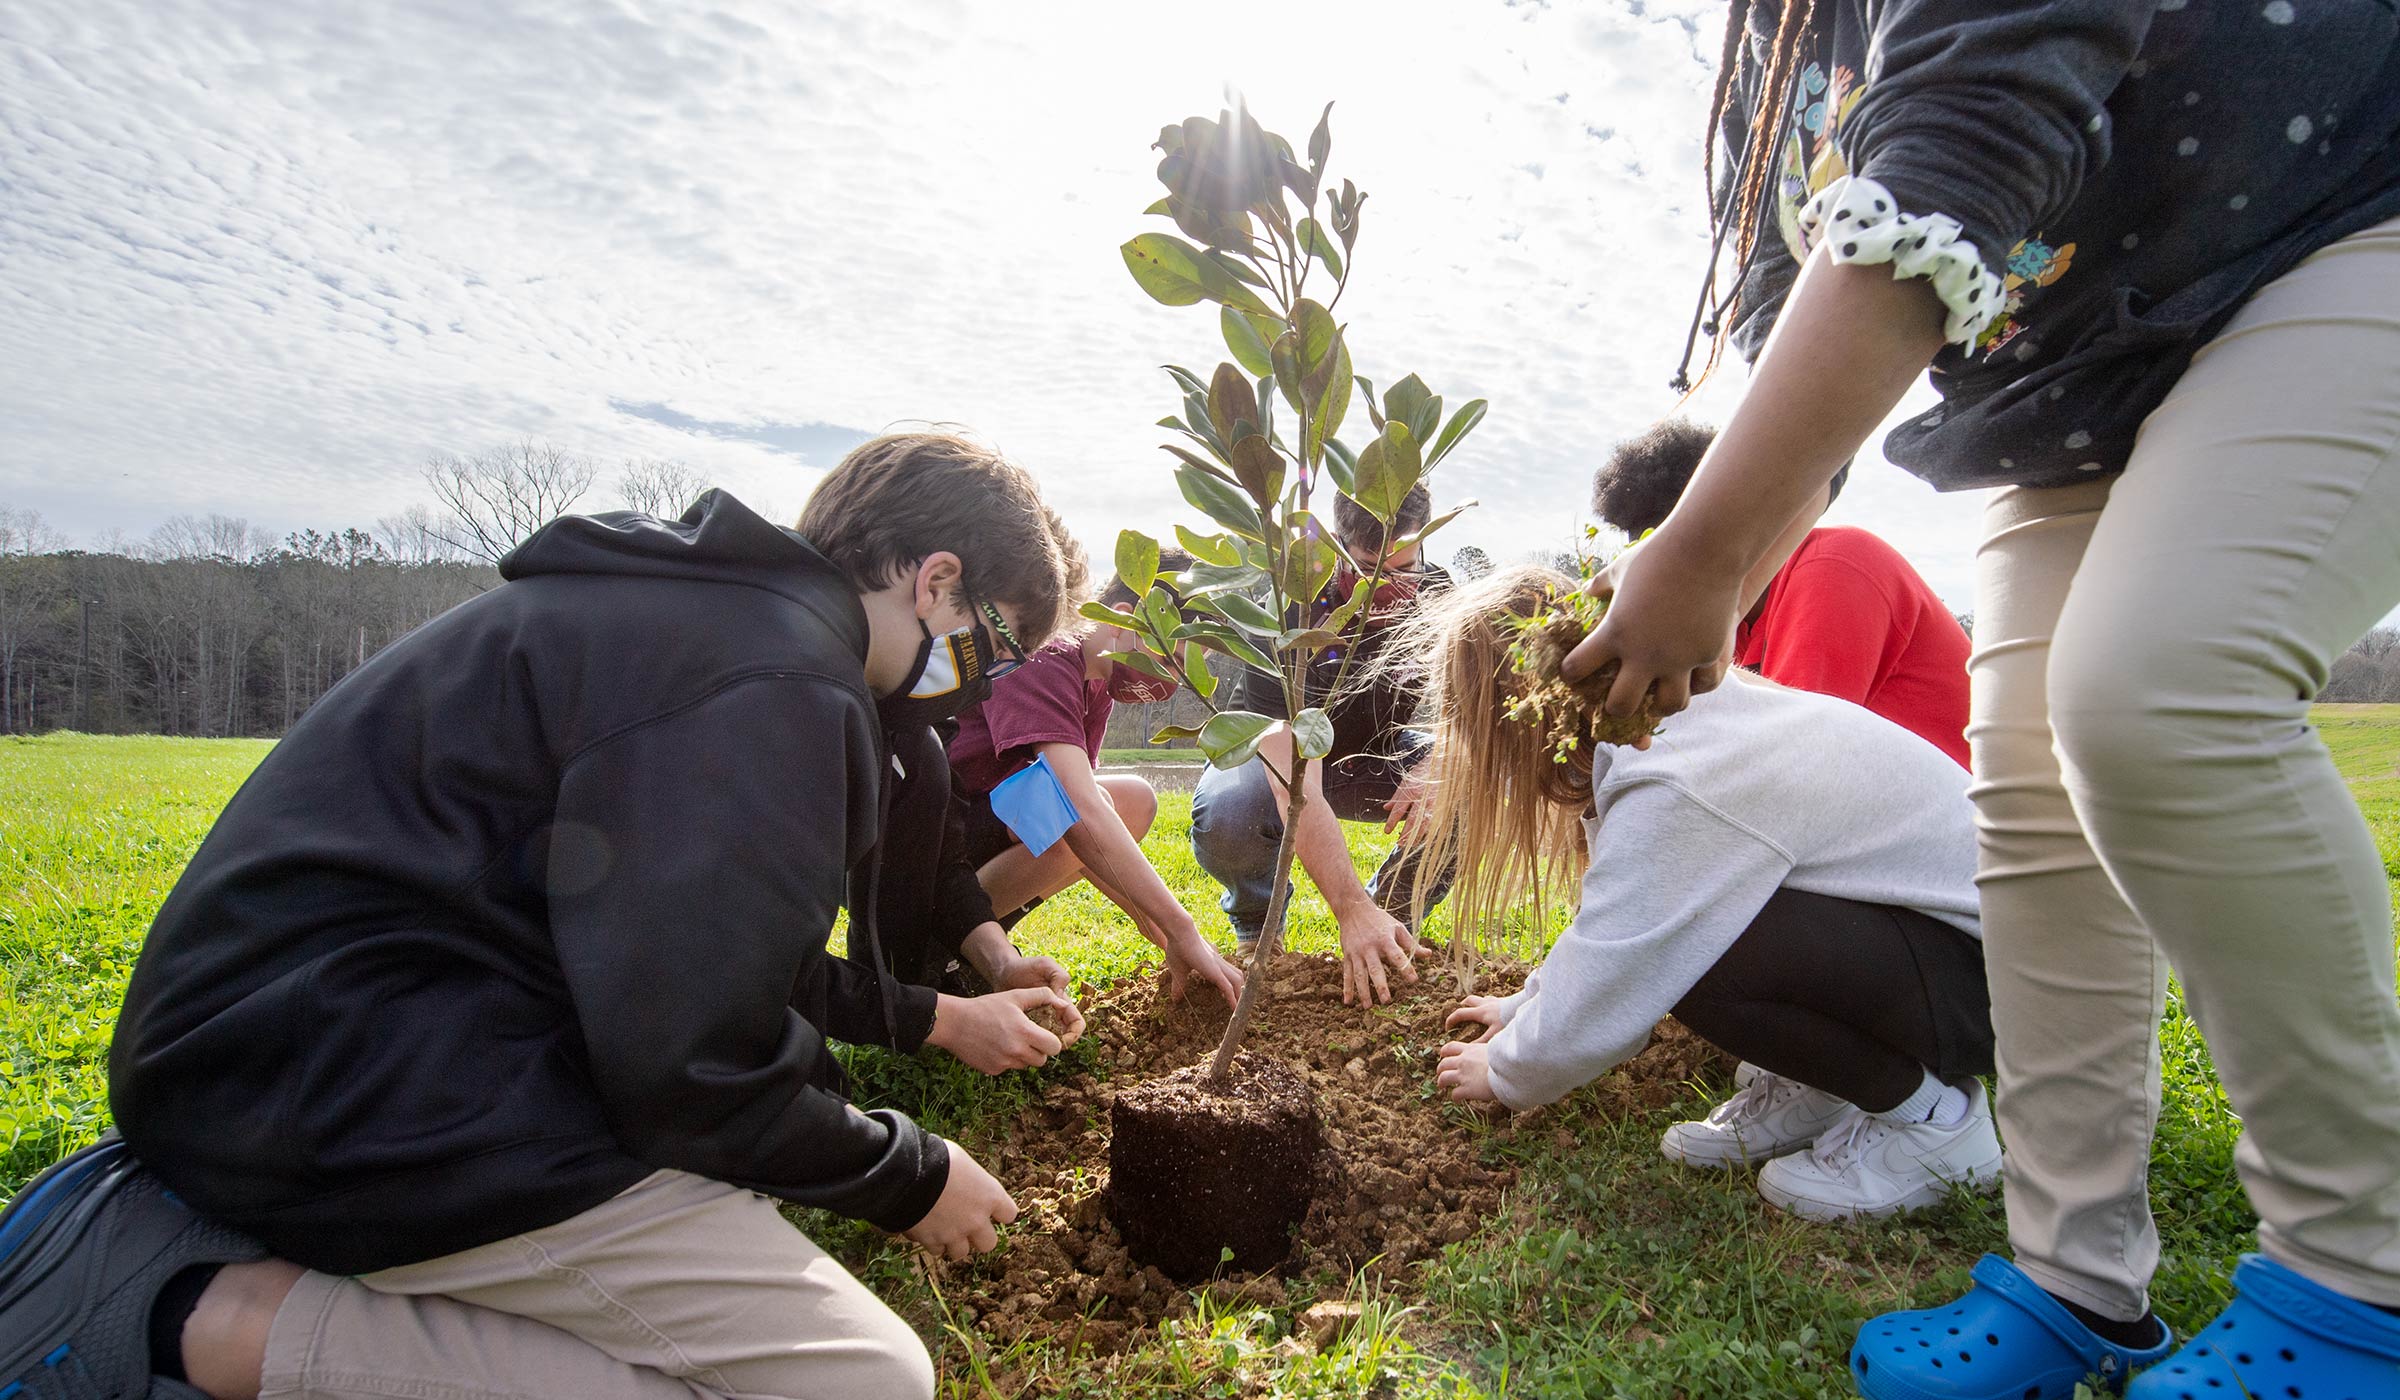 Partnership Middle School students scoop handfuls of dirt onto a freshly planted tree.